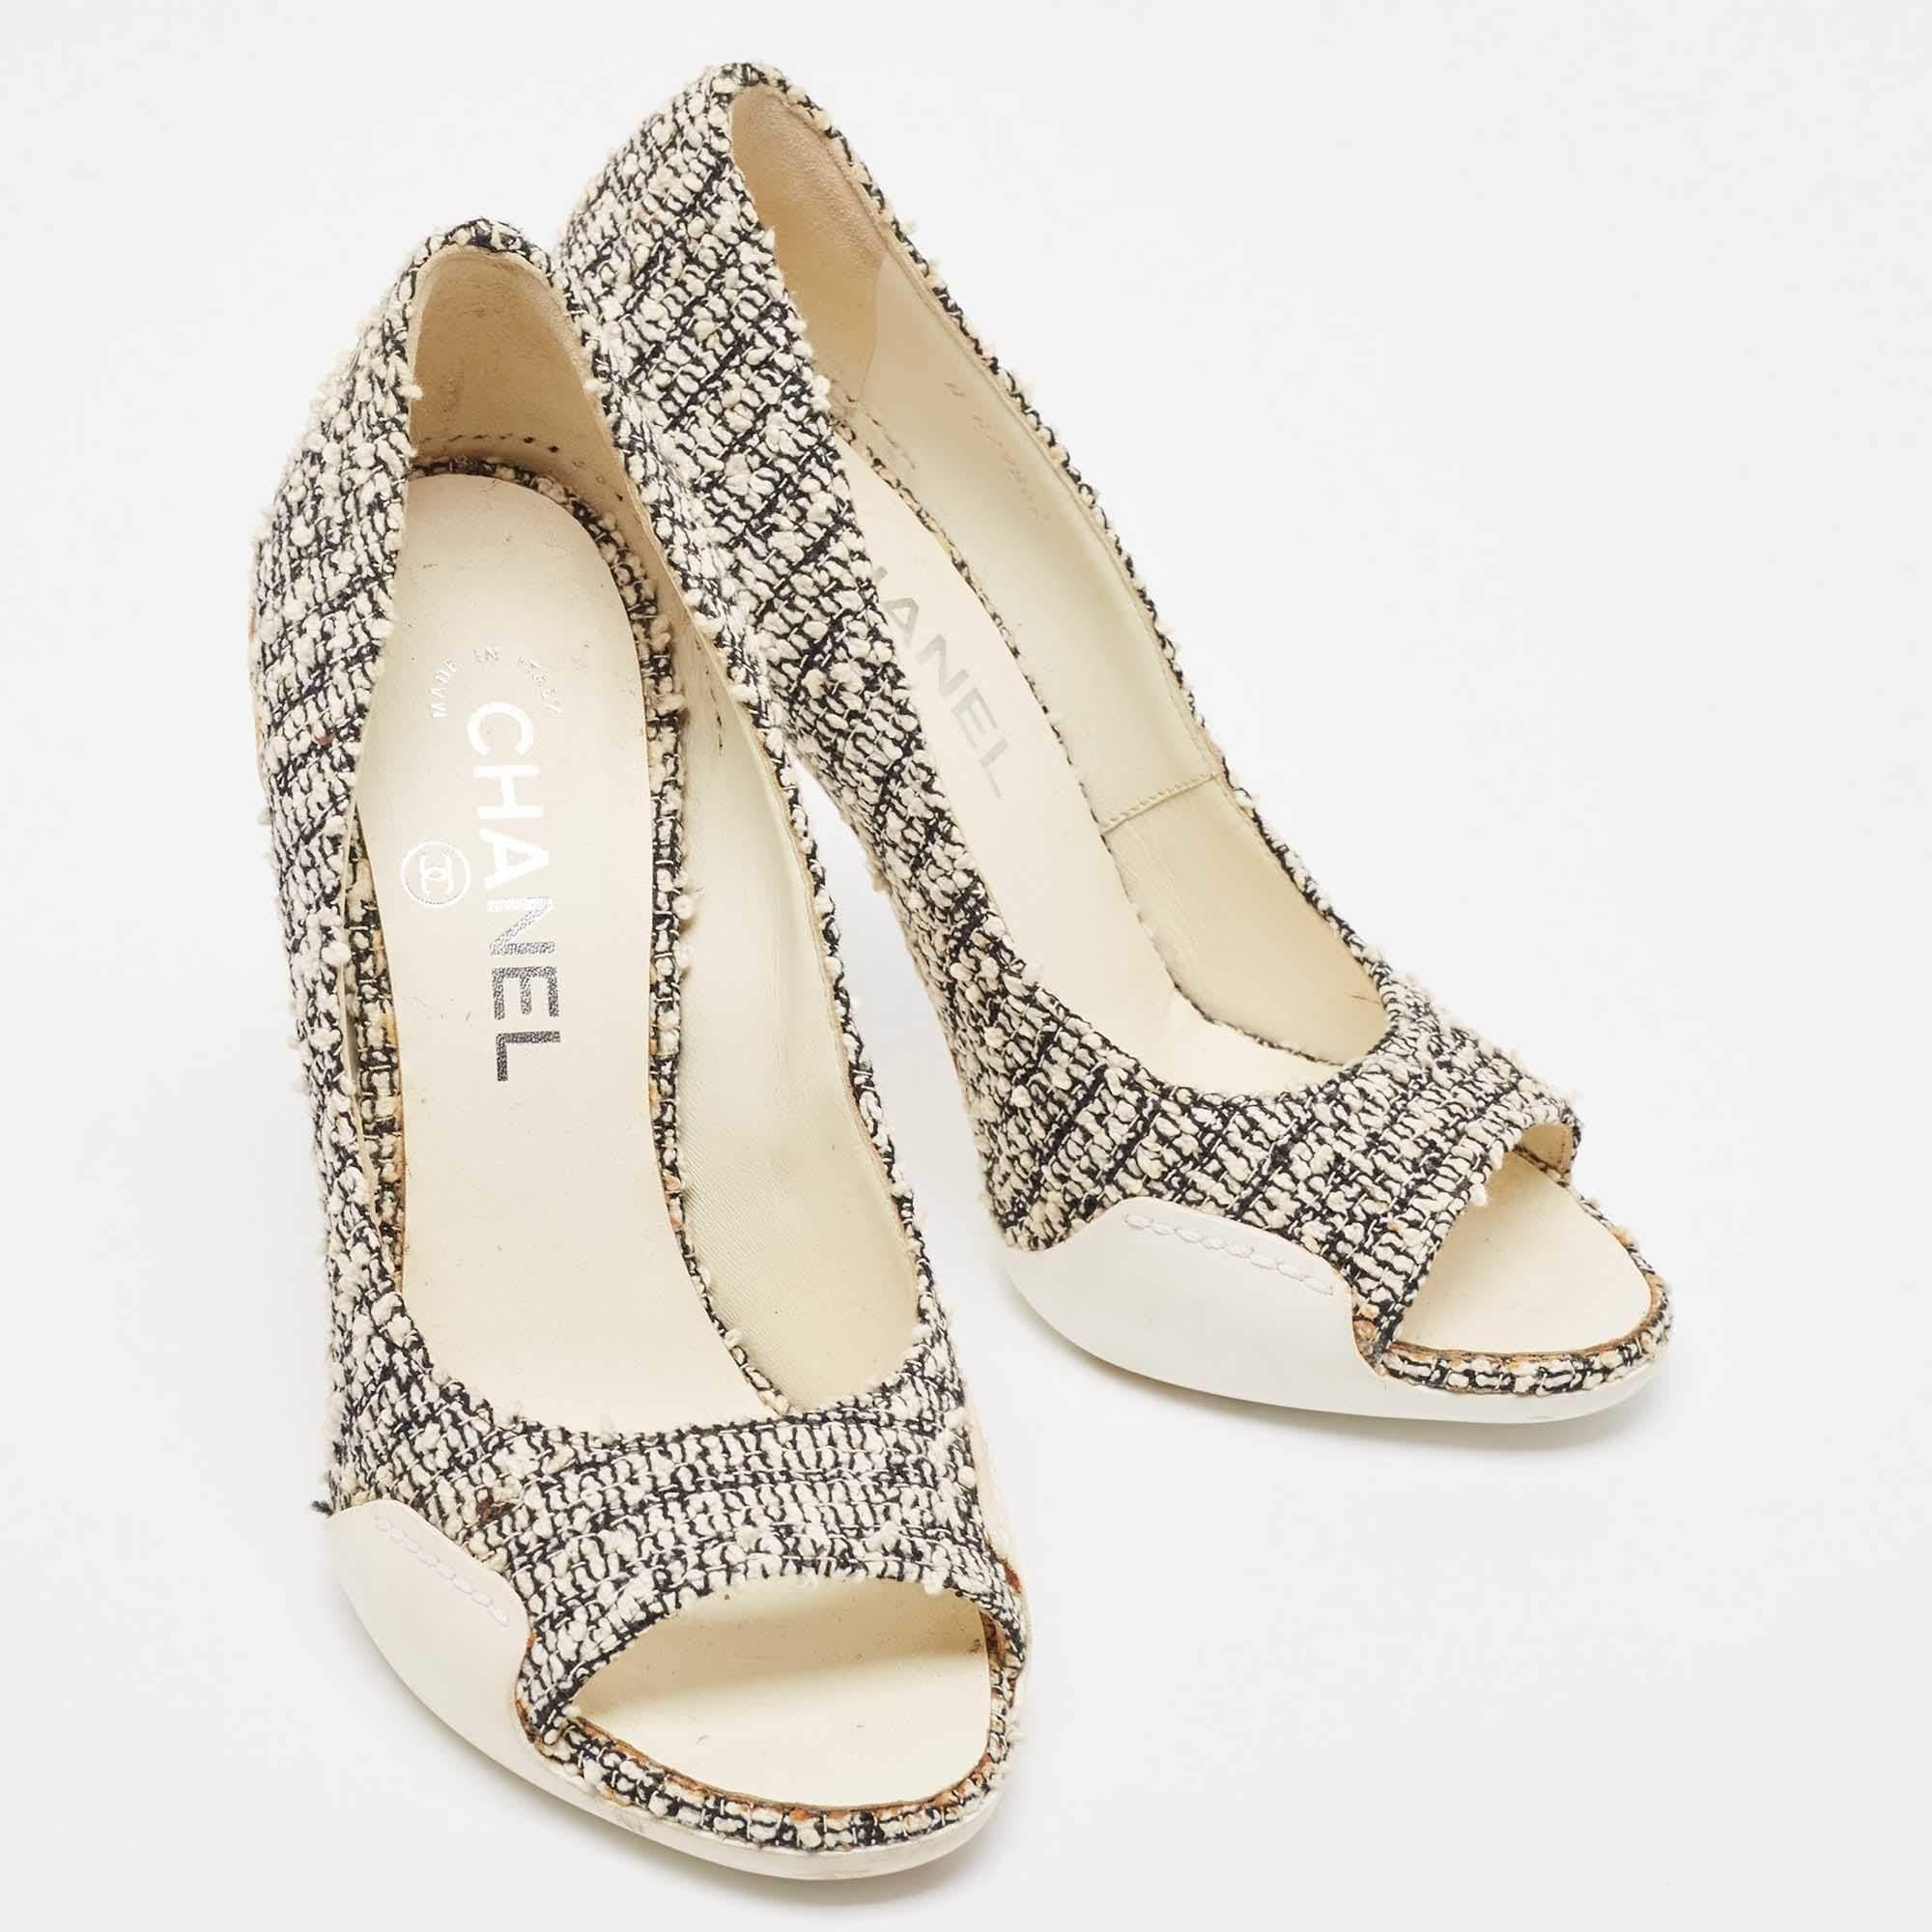 Chanel Off White/Black Tweed and Leather Open Toe Pumps Size 38 In Good Condition For Sale In Dubai, Al Qouz 2